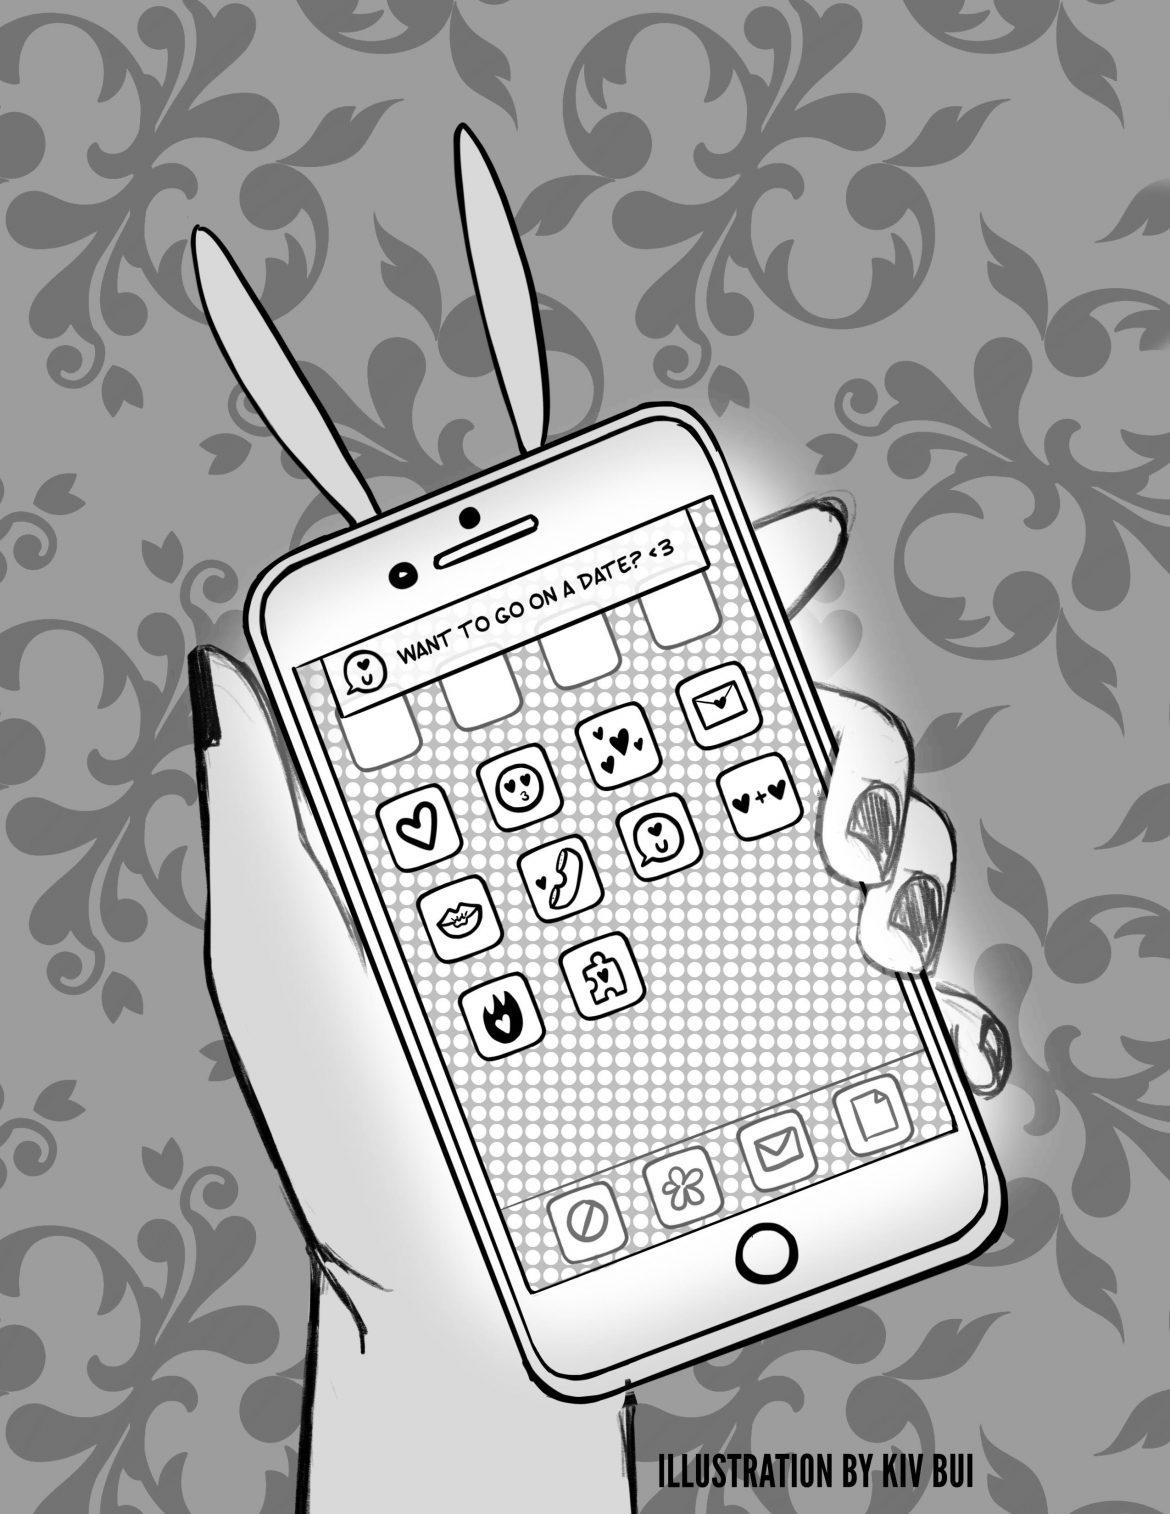 drawing of a hand holding a phone with a text on it asking want to go on a date?